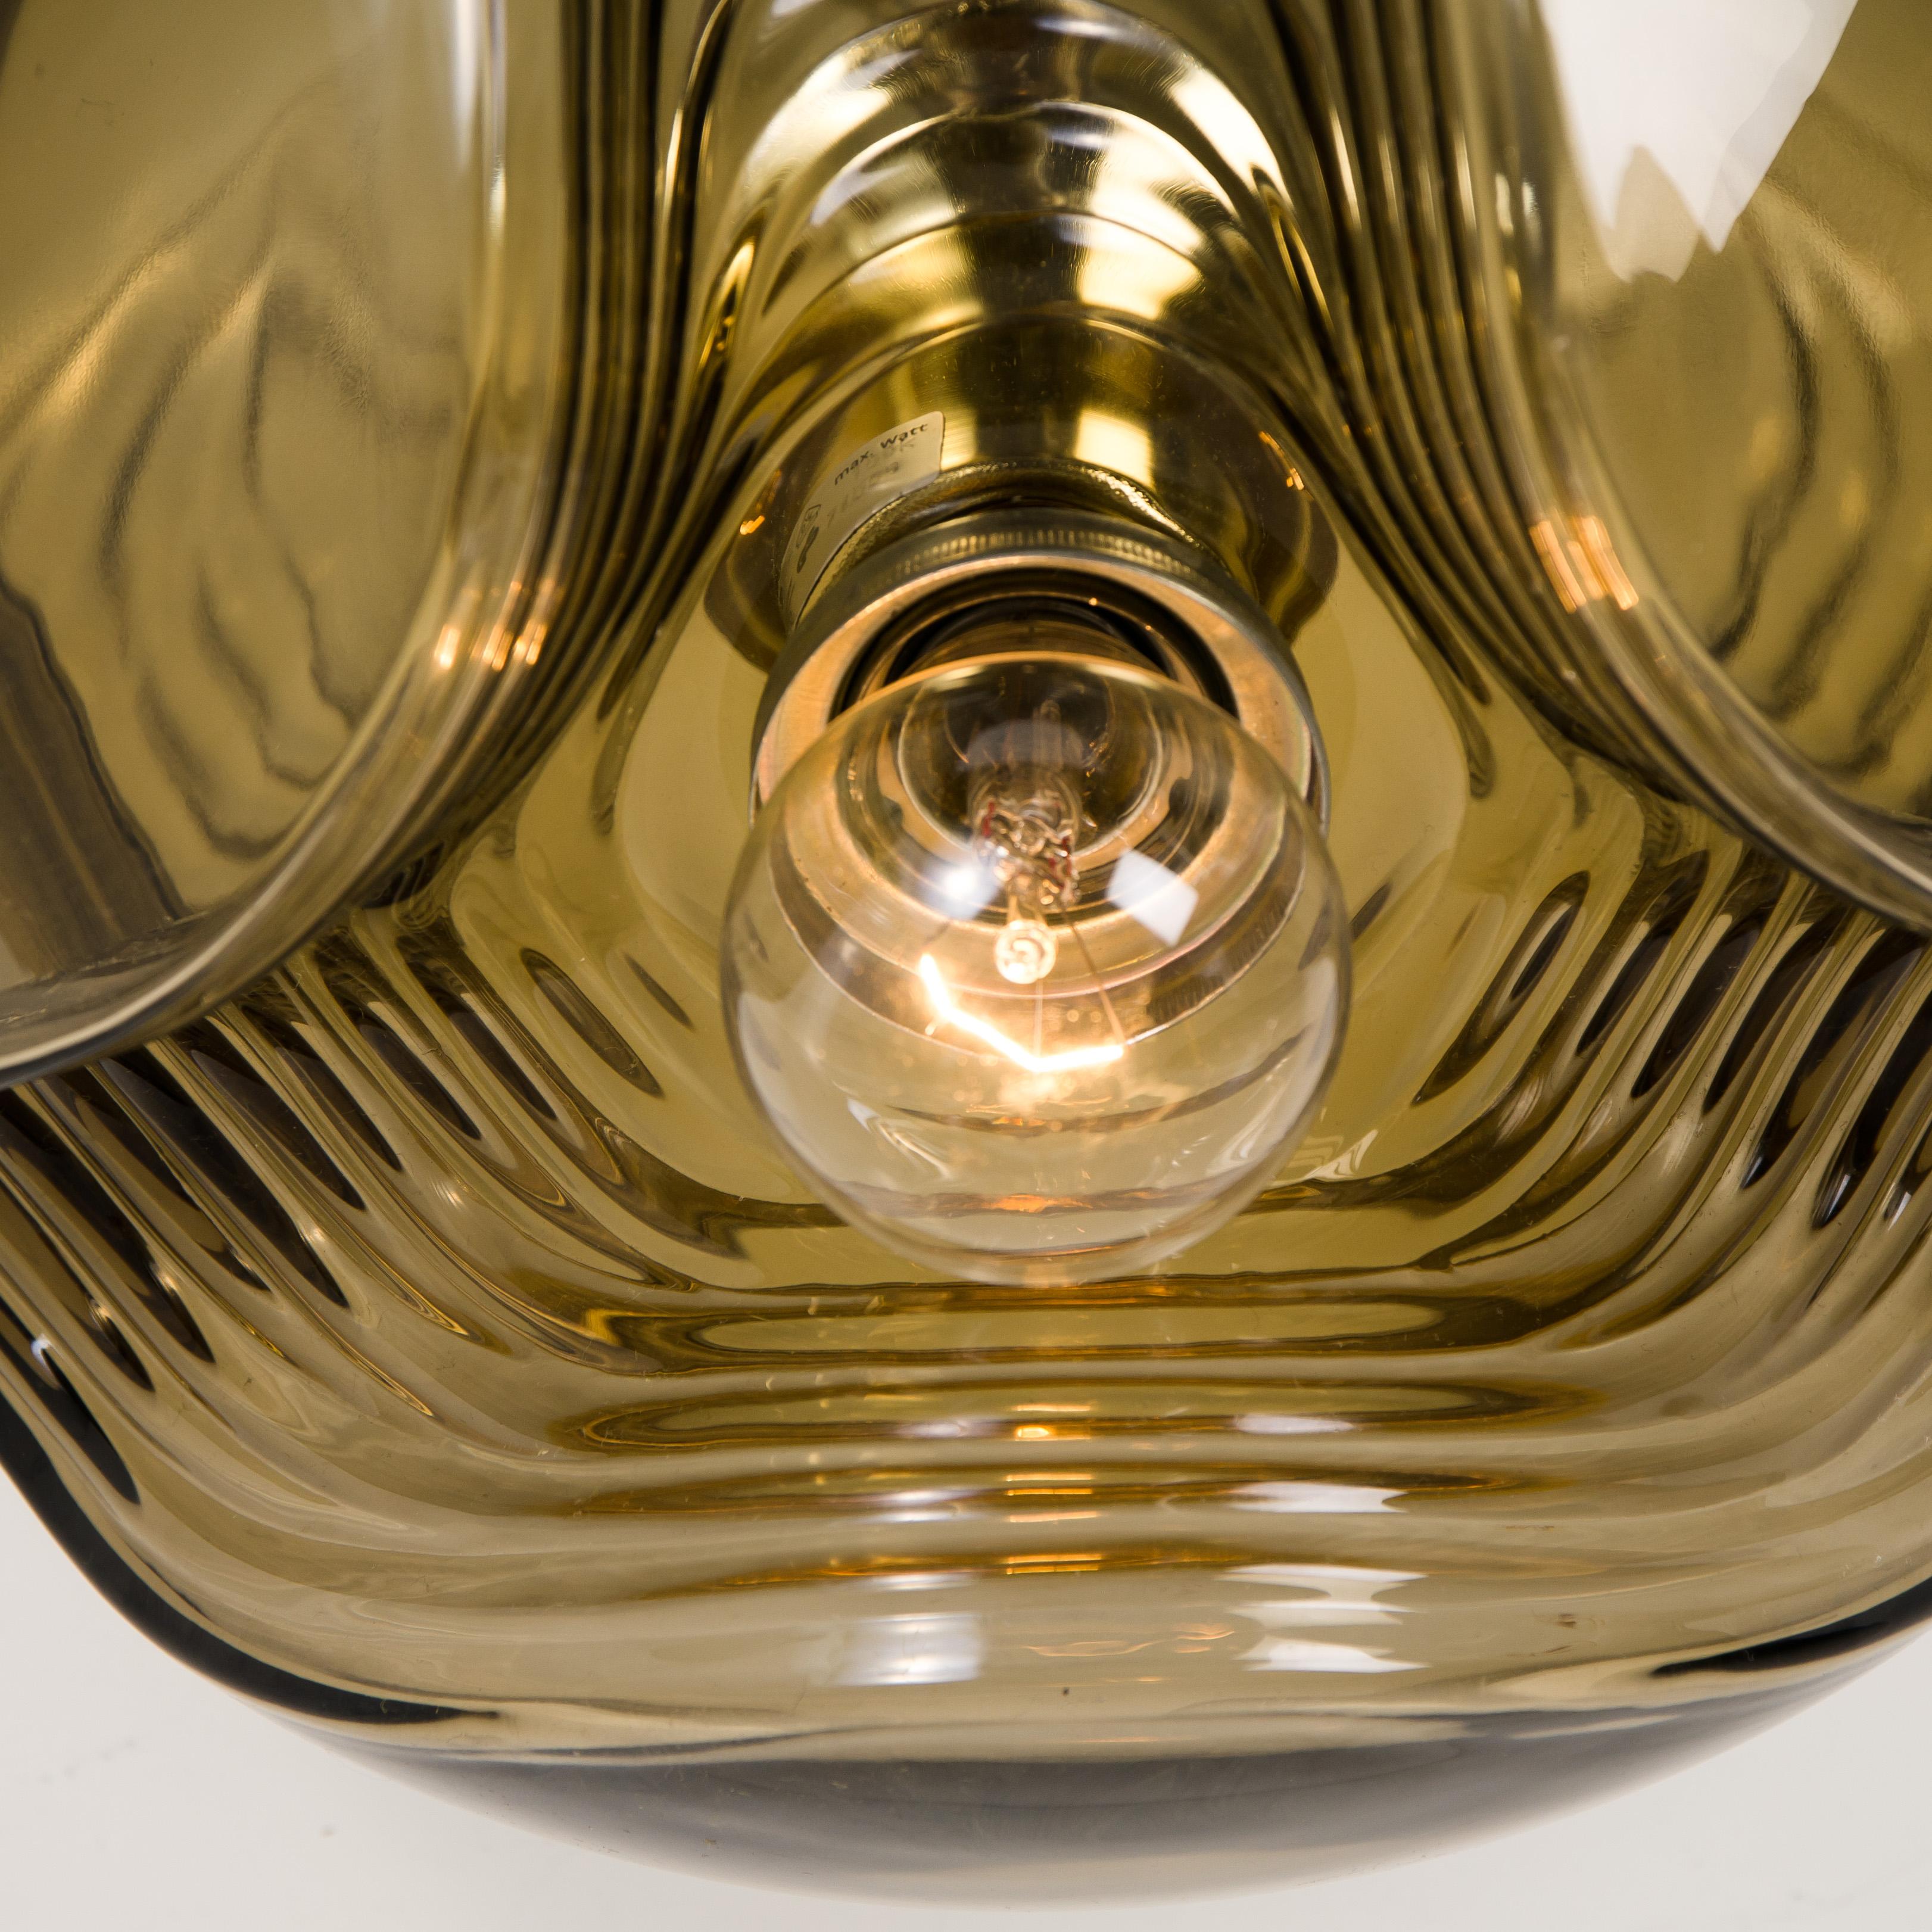 A special set of round Biomorphic smoked glass light fixtures designed by Koch & Lowy for Peill & Putzler, manufactured in Germany, circa 1970s.These Peill & Putzler vintage wall lights become quickly design classics. 

The blown glass has a